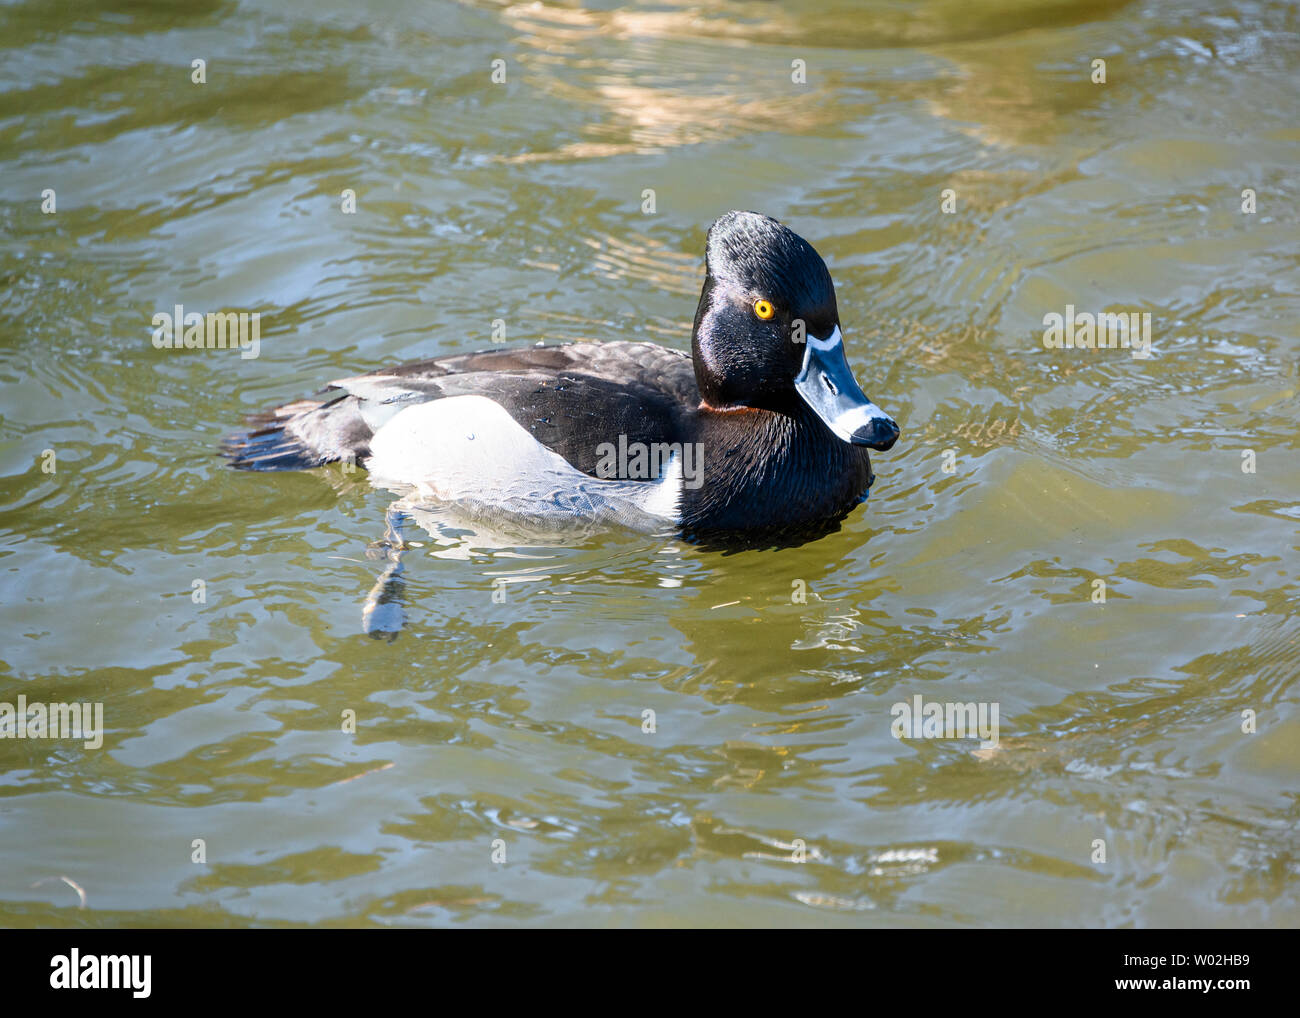 Black Neck Ring Bird High Resolution Stock Photography and Images - Alamy